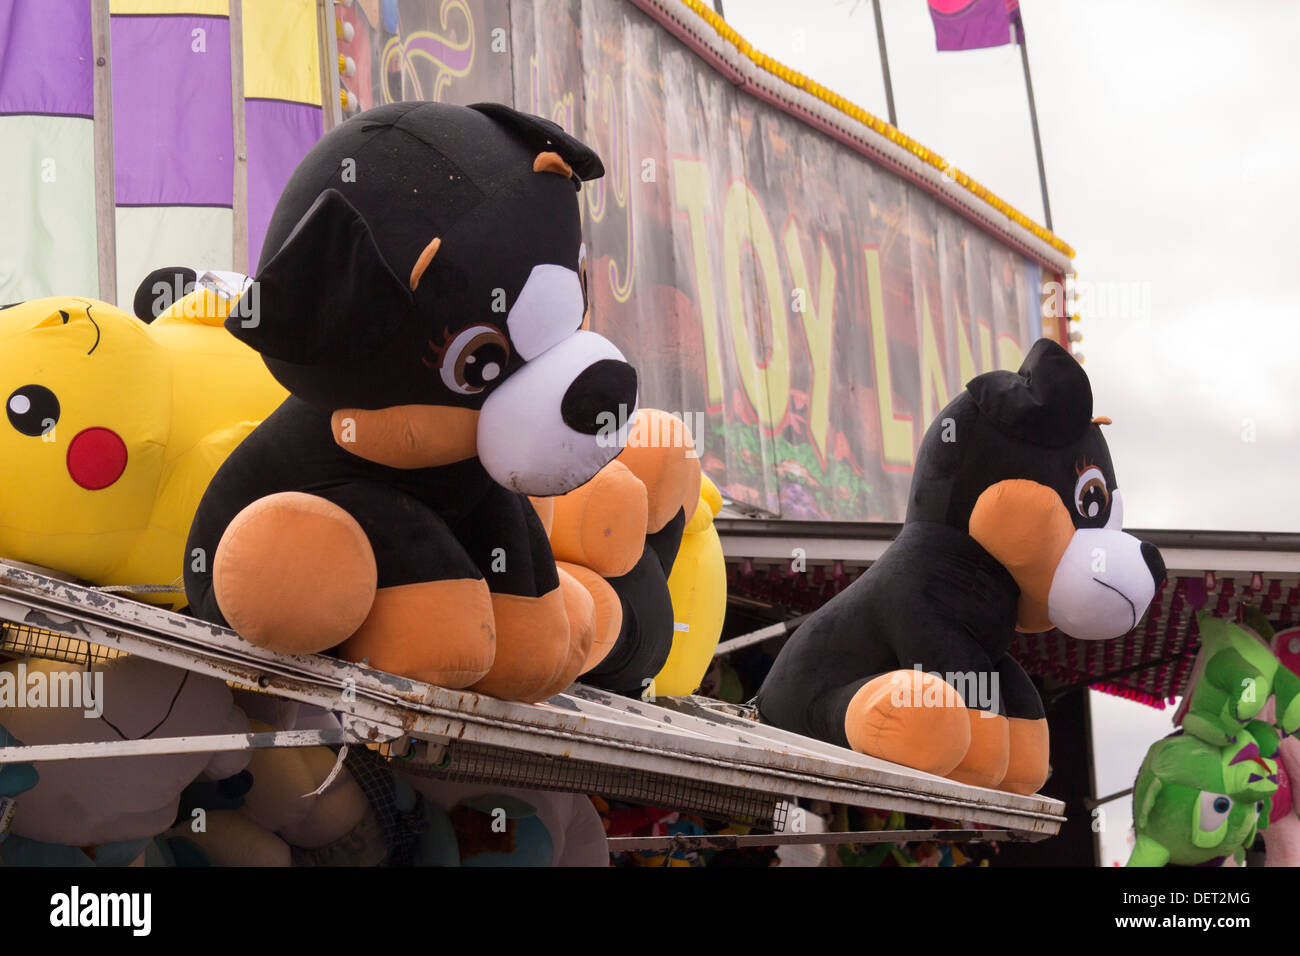 Plush Dogs and Pikachu on display at Lindsay Fair and Exhibition in Kawartha Lakes Stock Photo